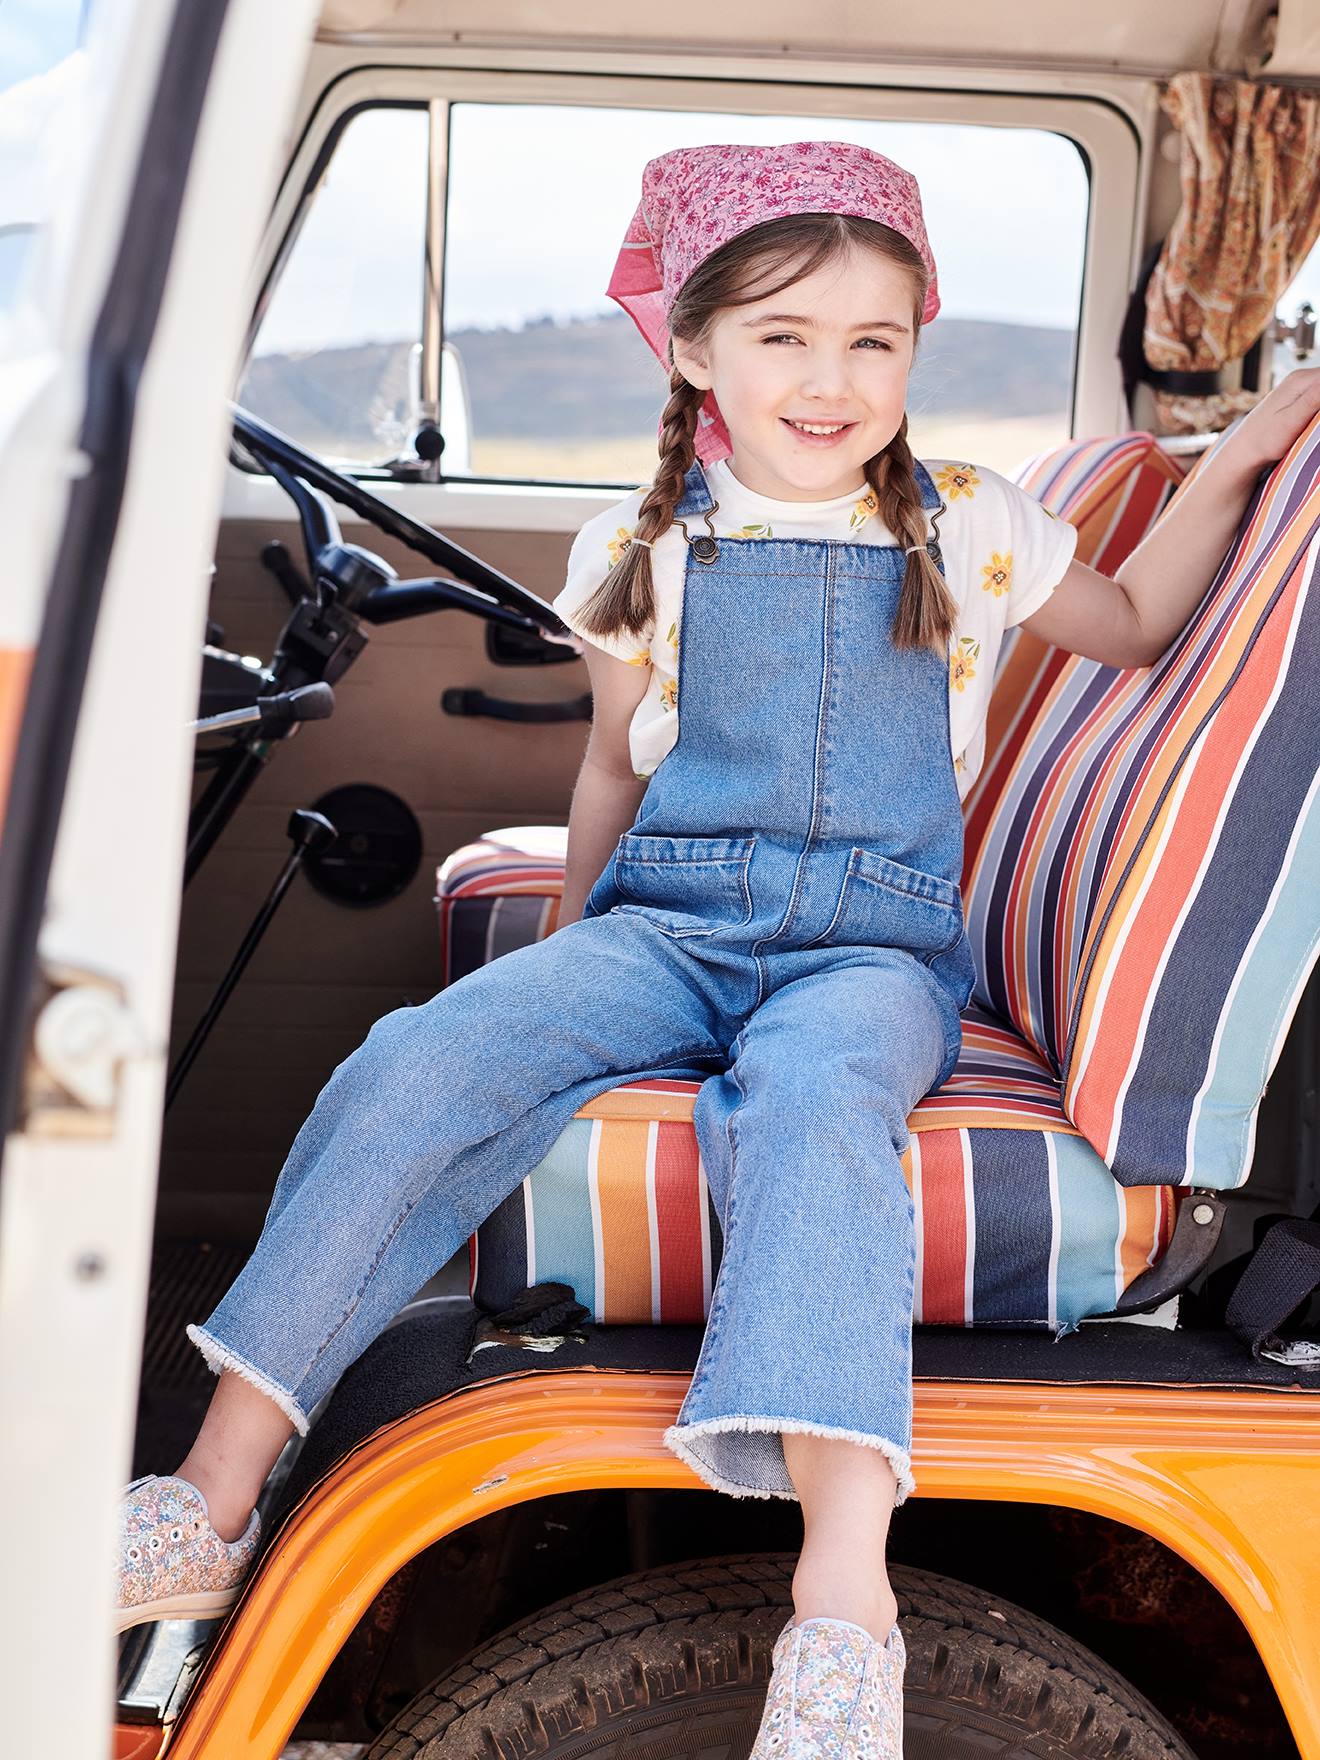 Buy Gap Denim Baby Dungarees from the Gap online shop